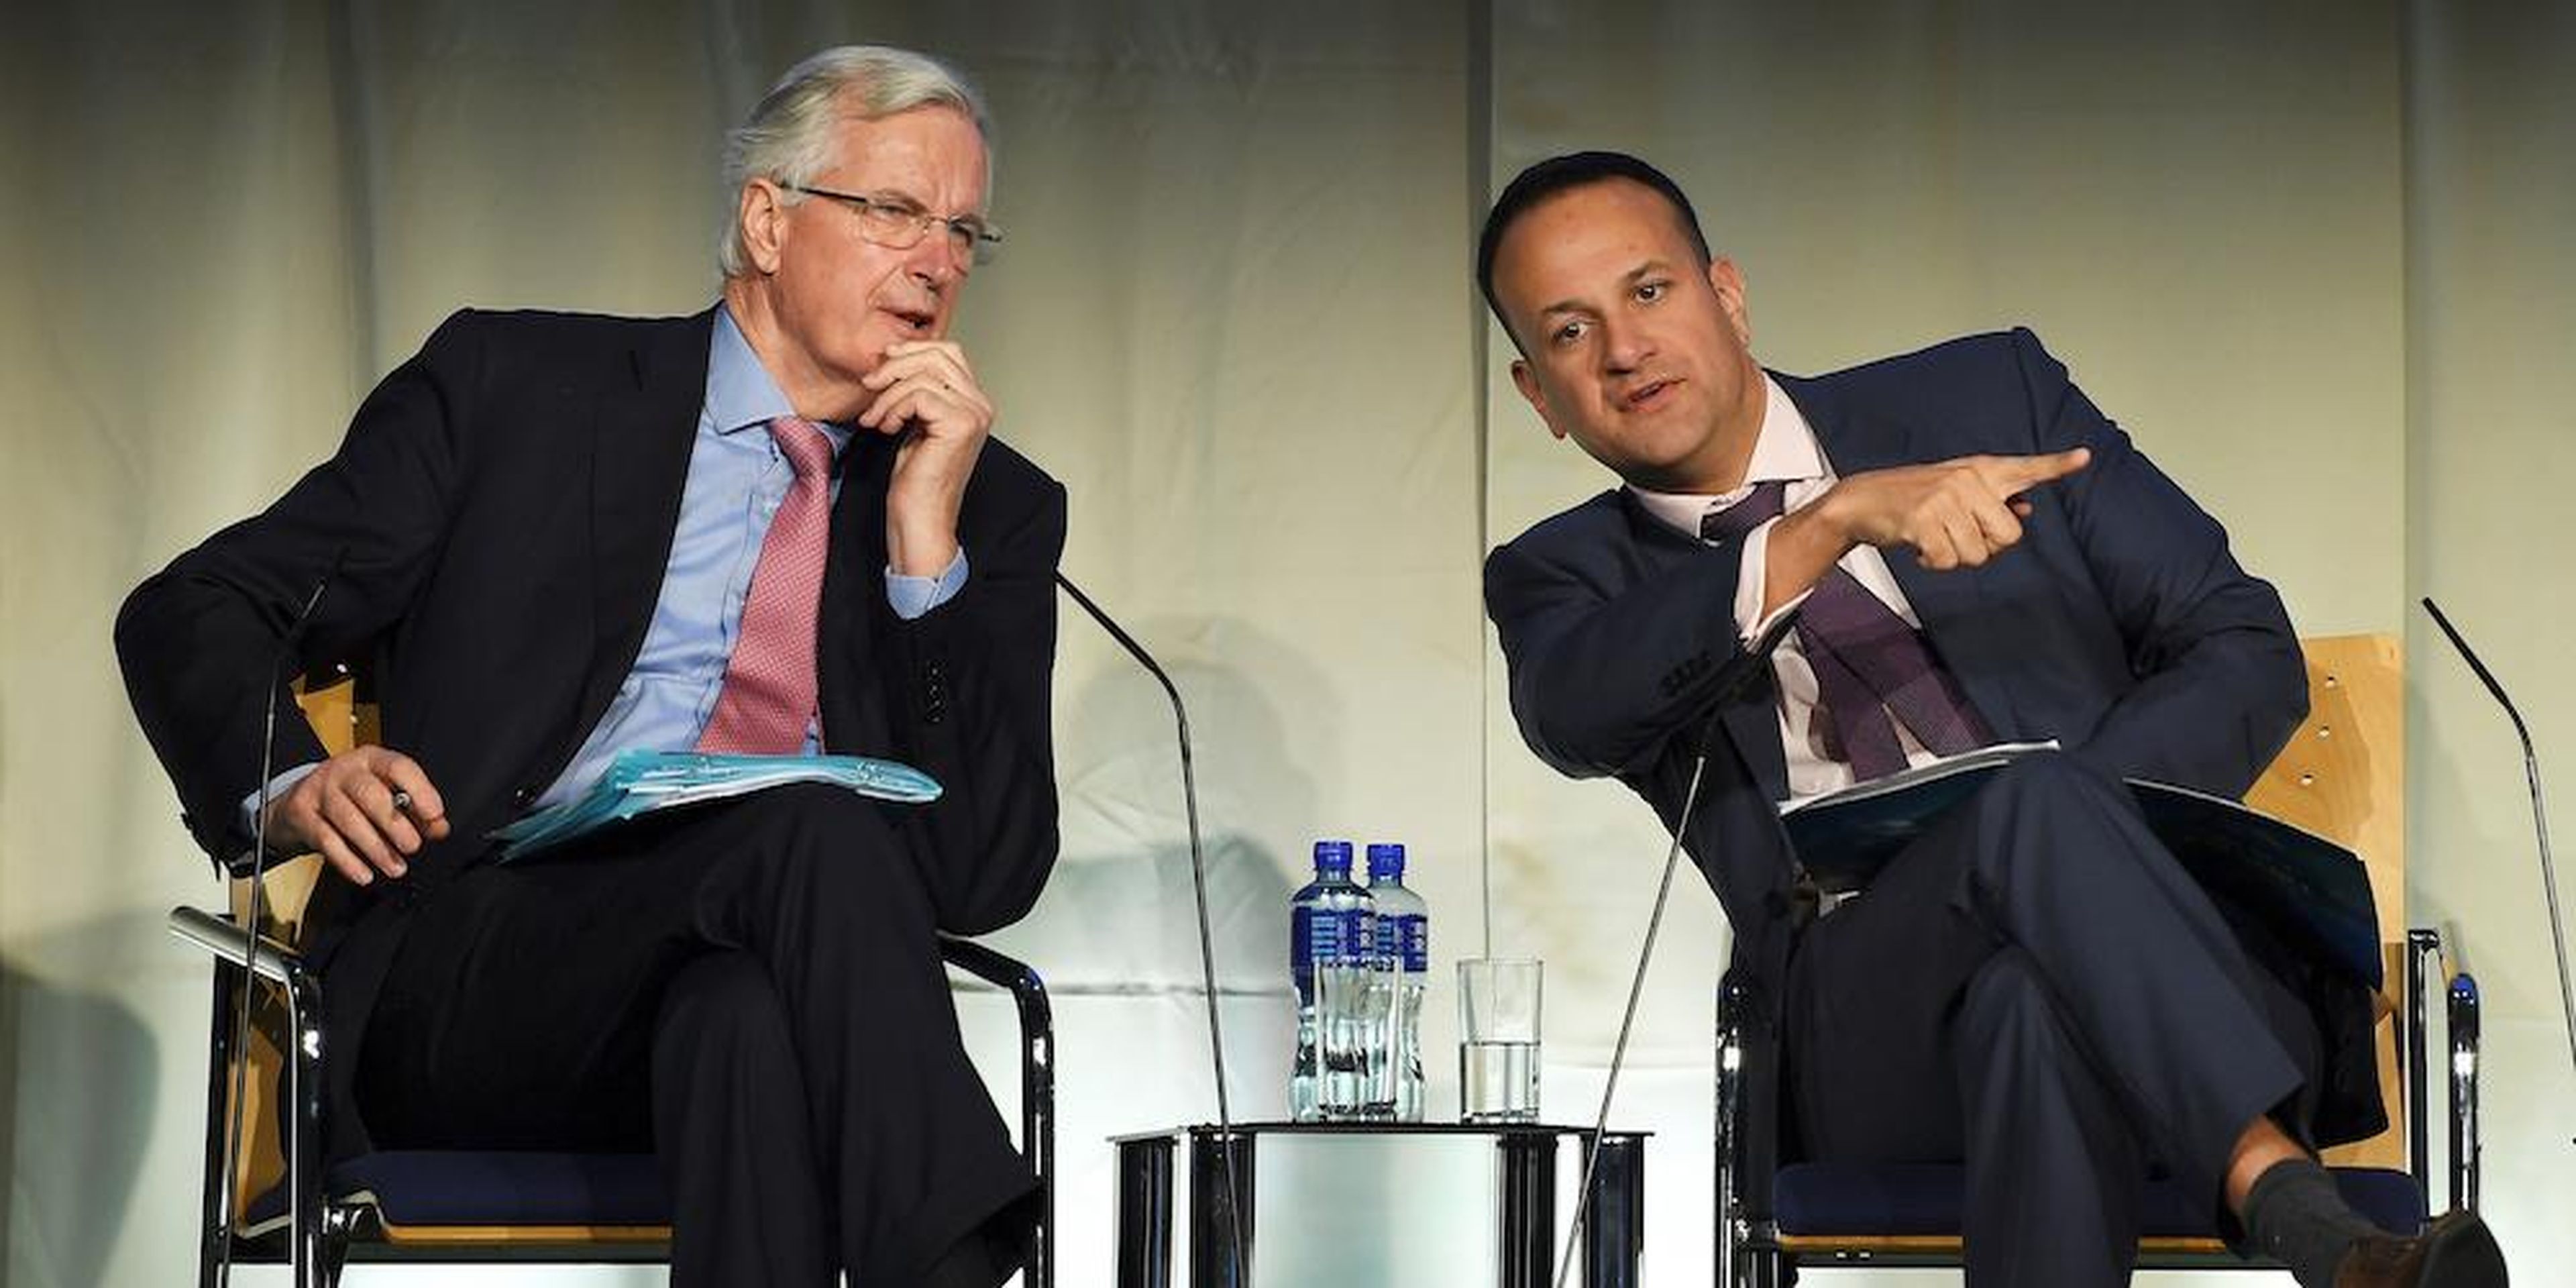 Michel Barnier, the European Union's chief Brexit negotiator, and Ireland's Taoiseach Leo Varadkar attend an all All-Island Civic Dialogue on Brexit in Dundalk, Ireland, April 30, 2018.